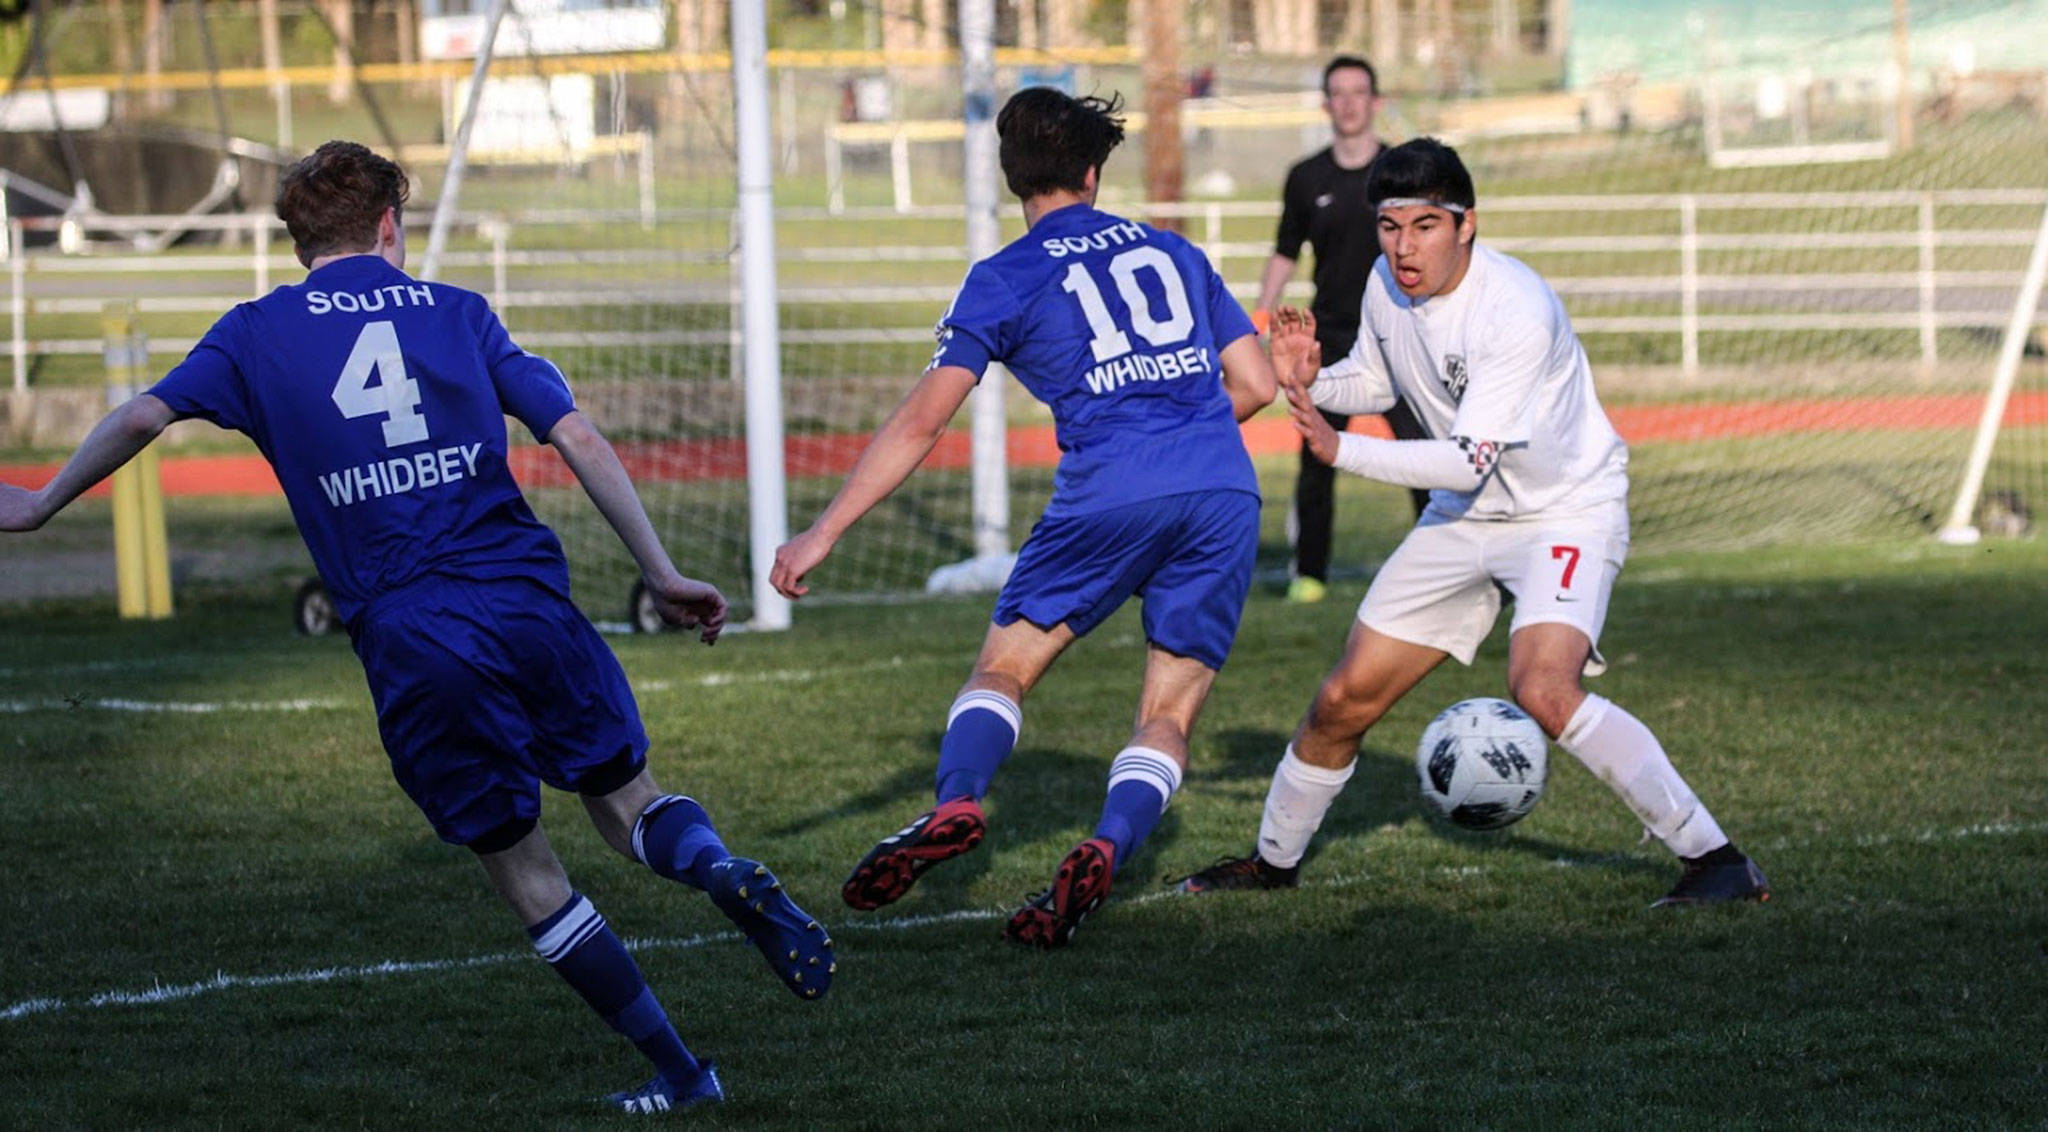 Coupeville’s Aram Leyva (7) faces off with South Whidbey’s Michael Lux (10). (Photo by Matt Simms)